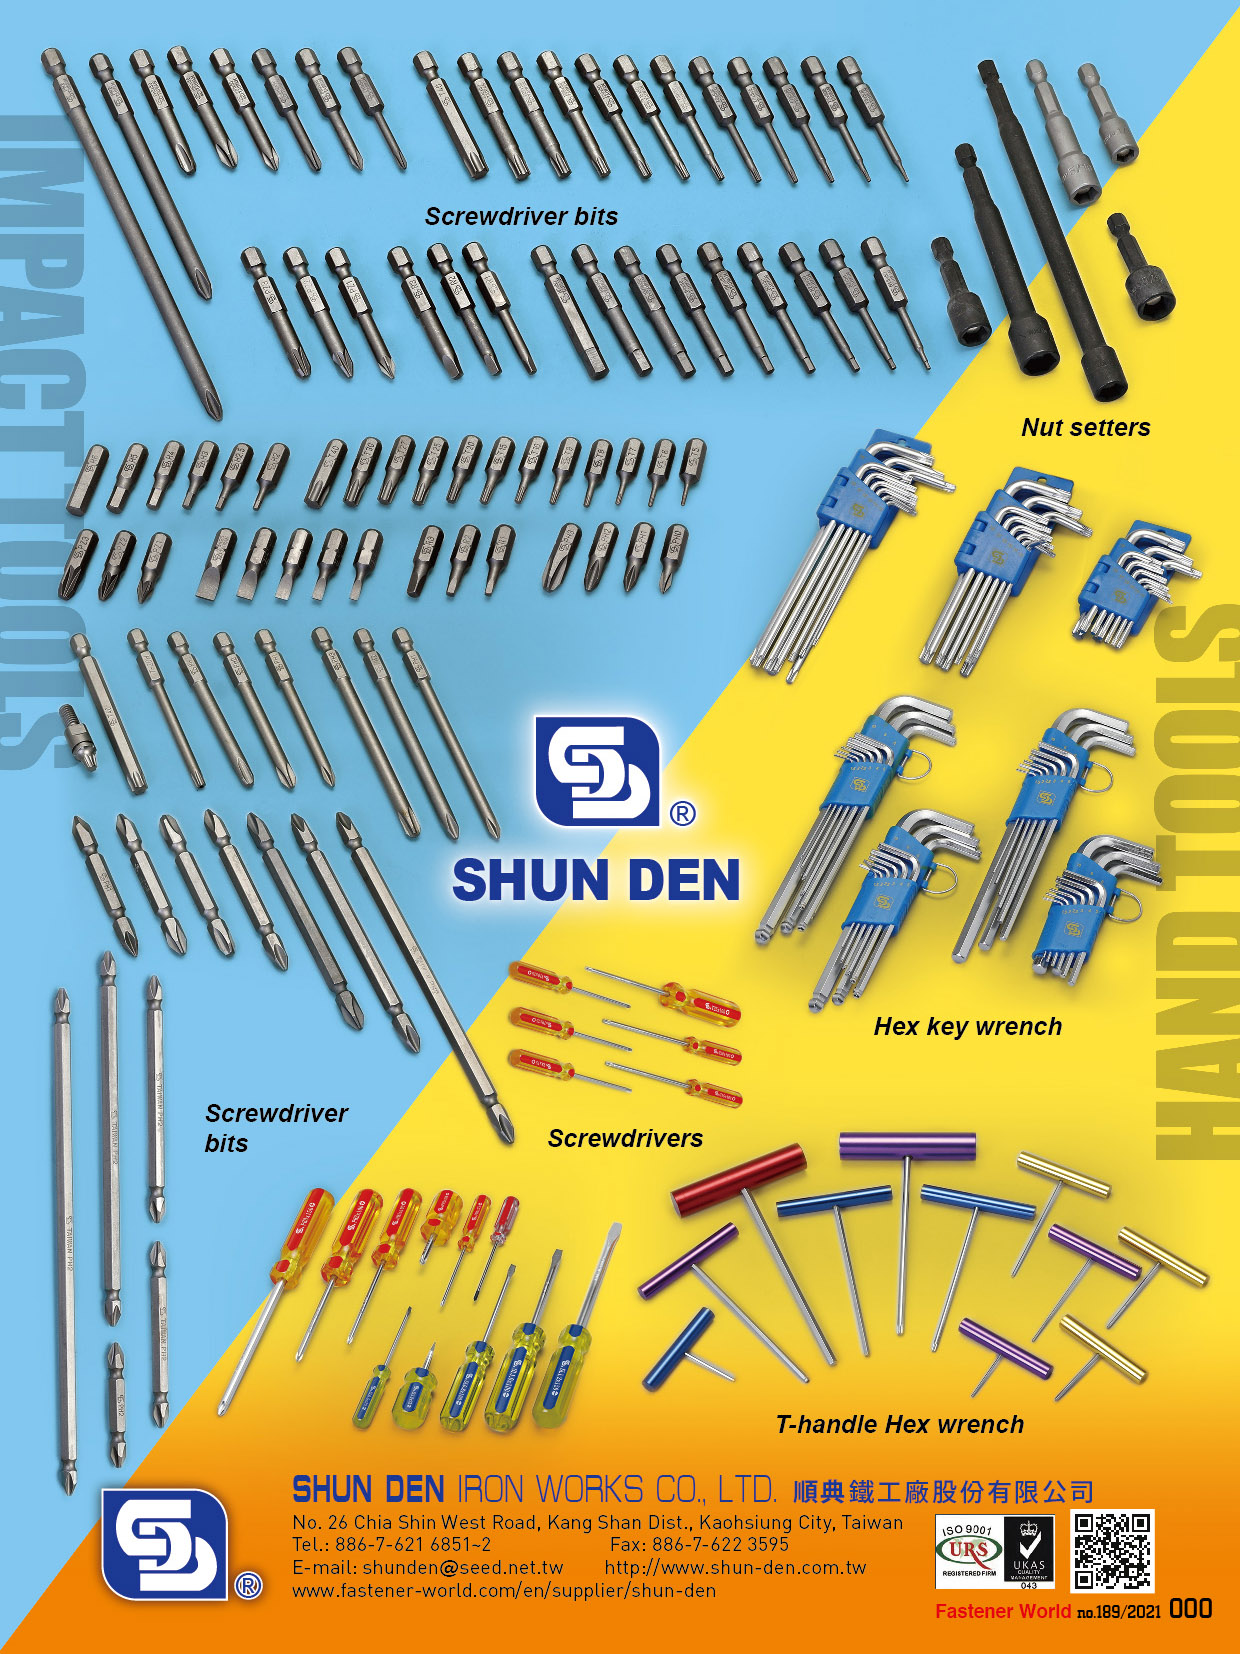 SHUN DEN IRON WORKS CO., LTD.  , Hex Washer Head Screws, Indent Hex Head Screws, Self Tapping Screws, Self Drilling Screws , Hex-key Wrenches